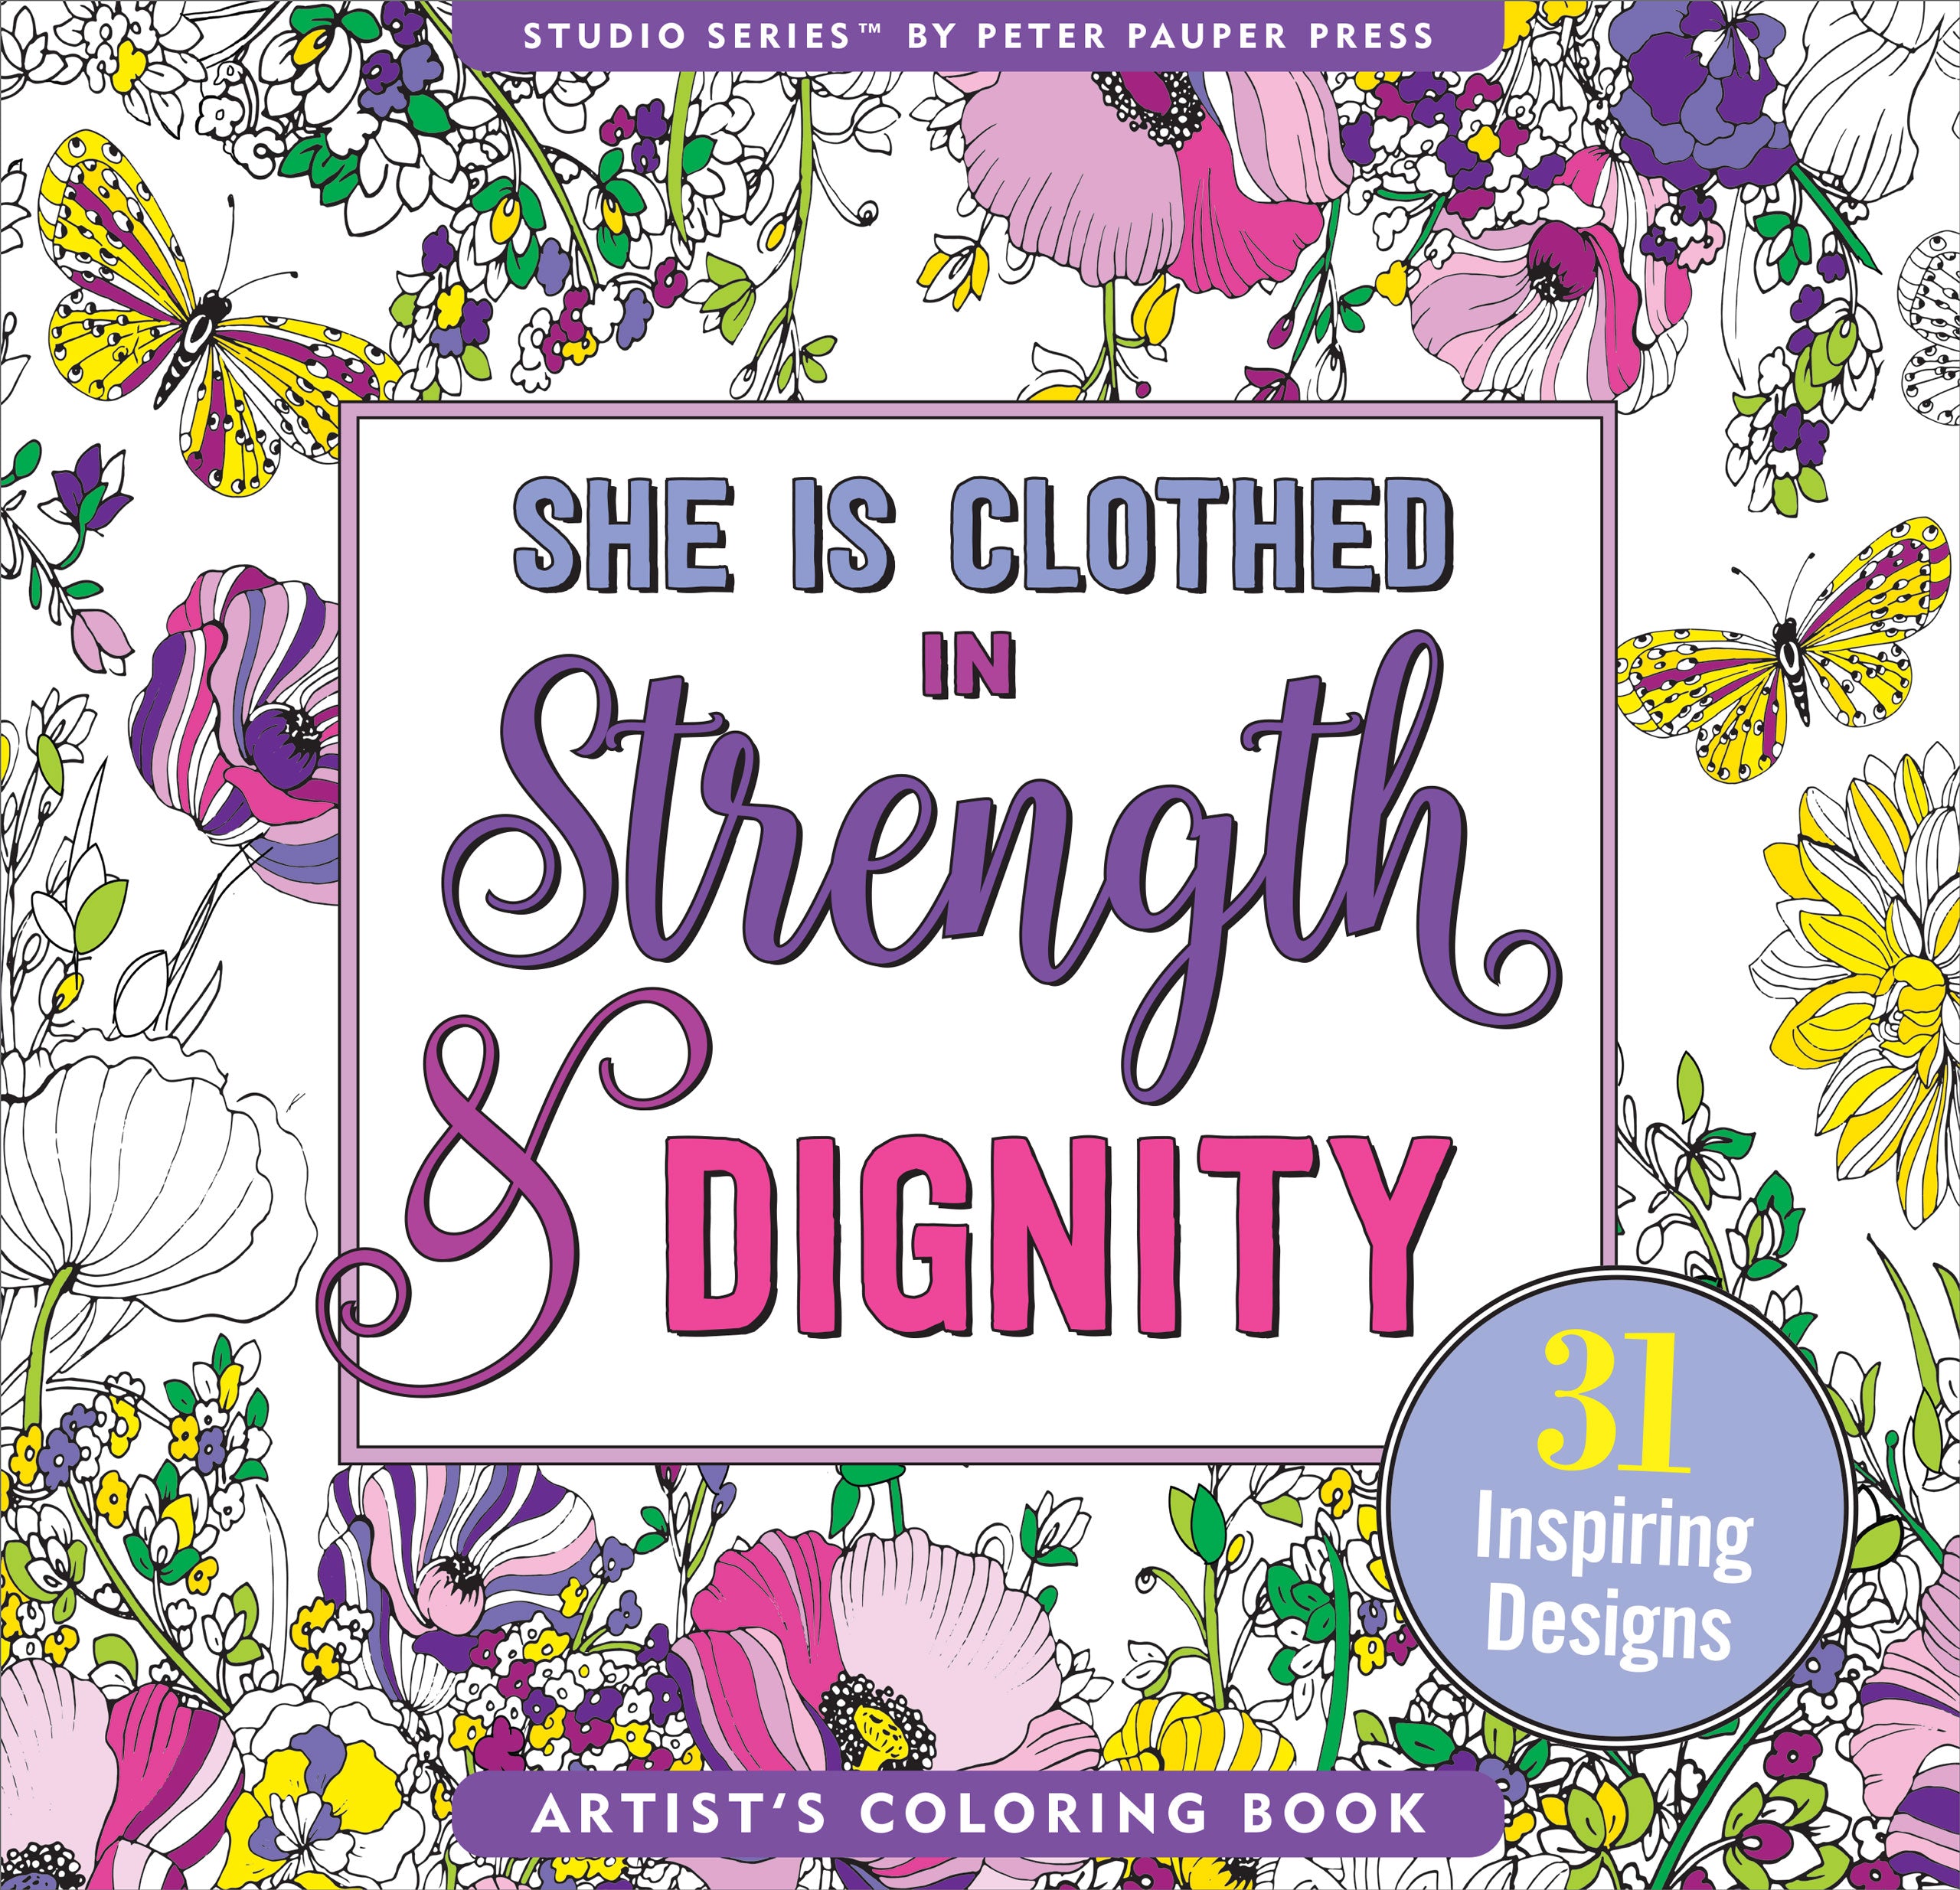 Strength and dignity artists coloring book â peter pauper press